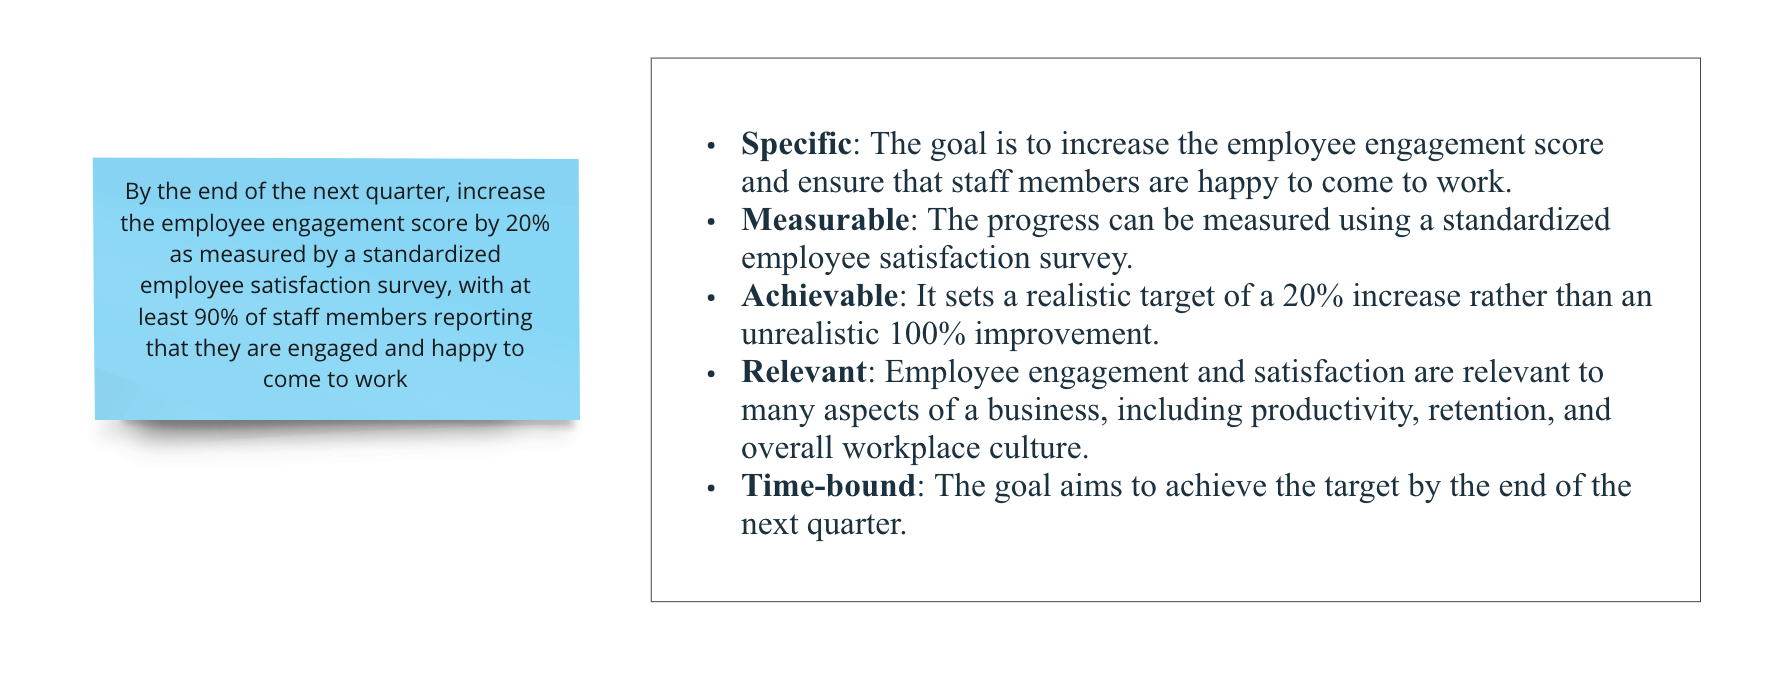 Specific: The goal is to increase the employee engagement score and ensure that staff members are happy to come to work.
Measurable: The progress can be measured using a standardized employee satisfaction survey.
Achievable: It sets a realistic target of a 20% increase rather than an unrealistic 100% improvement.
Relevant: Employee engagement and satisfaction are relevant to many aspects of a business, including productivity, retention, and overall workplace culture.
Time-bound: The goal aims to achieve the target by the end of the next quarter.